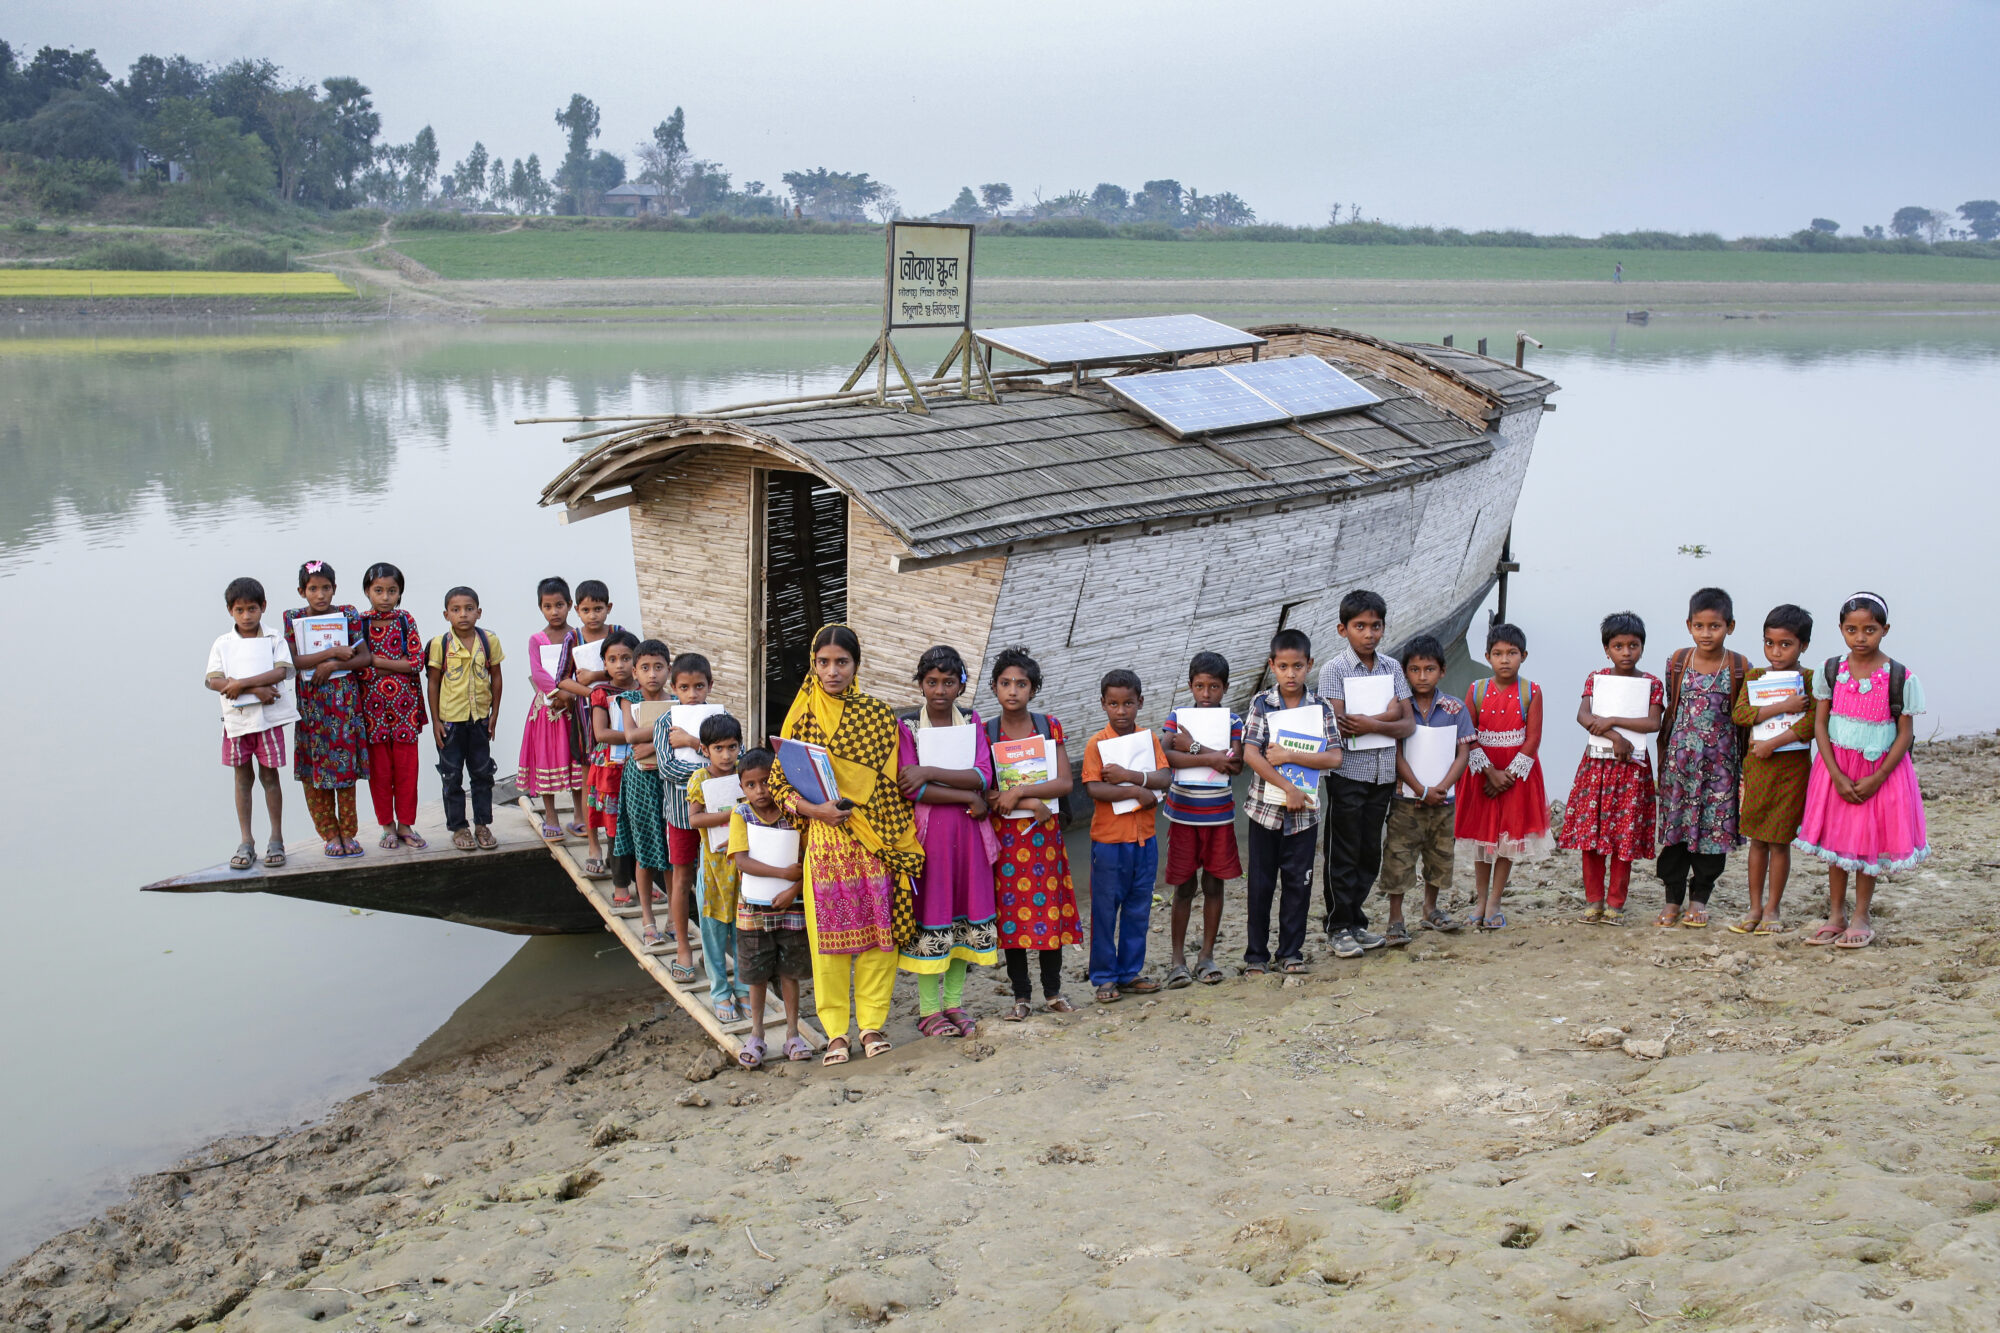 A group of school children and their teacher stand together outside of a small boat with a wicker roof on the banks of a river.